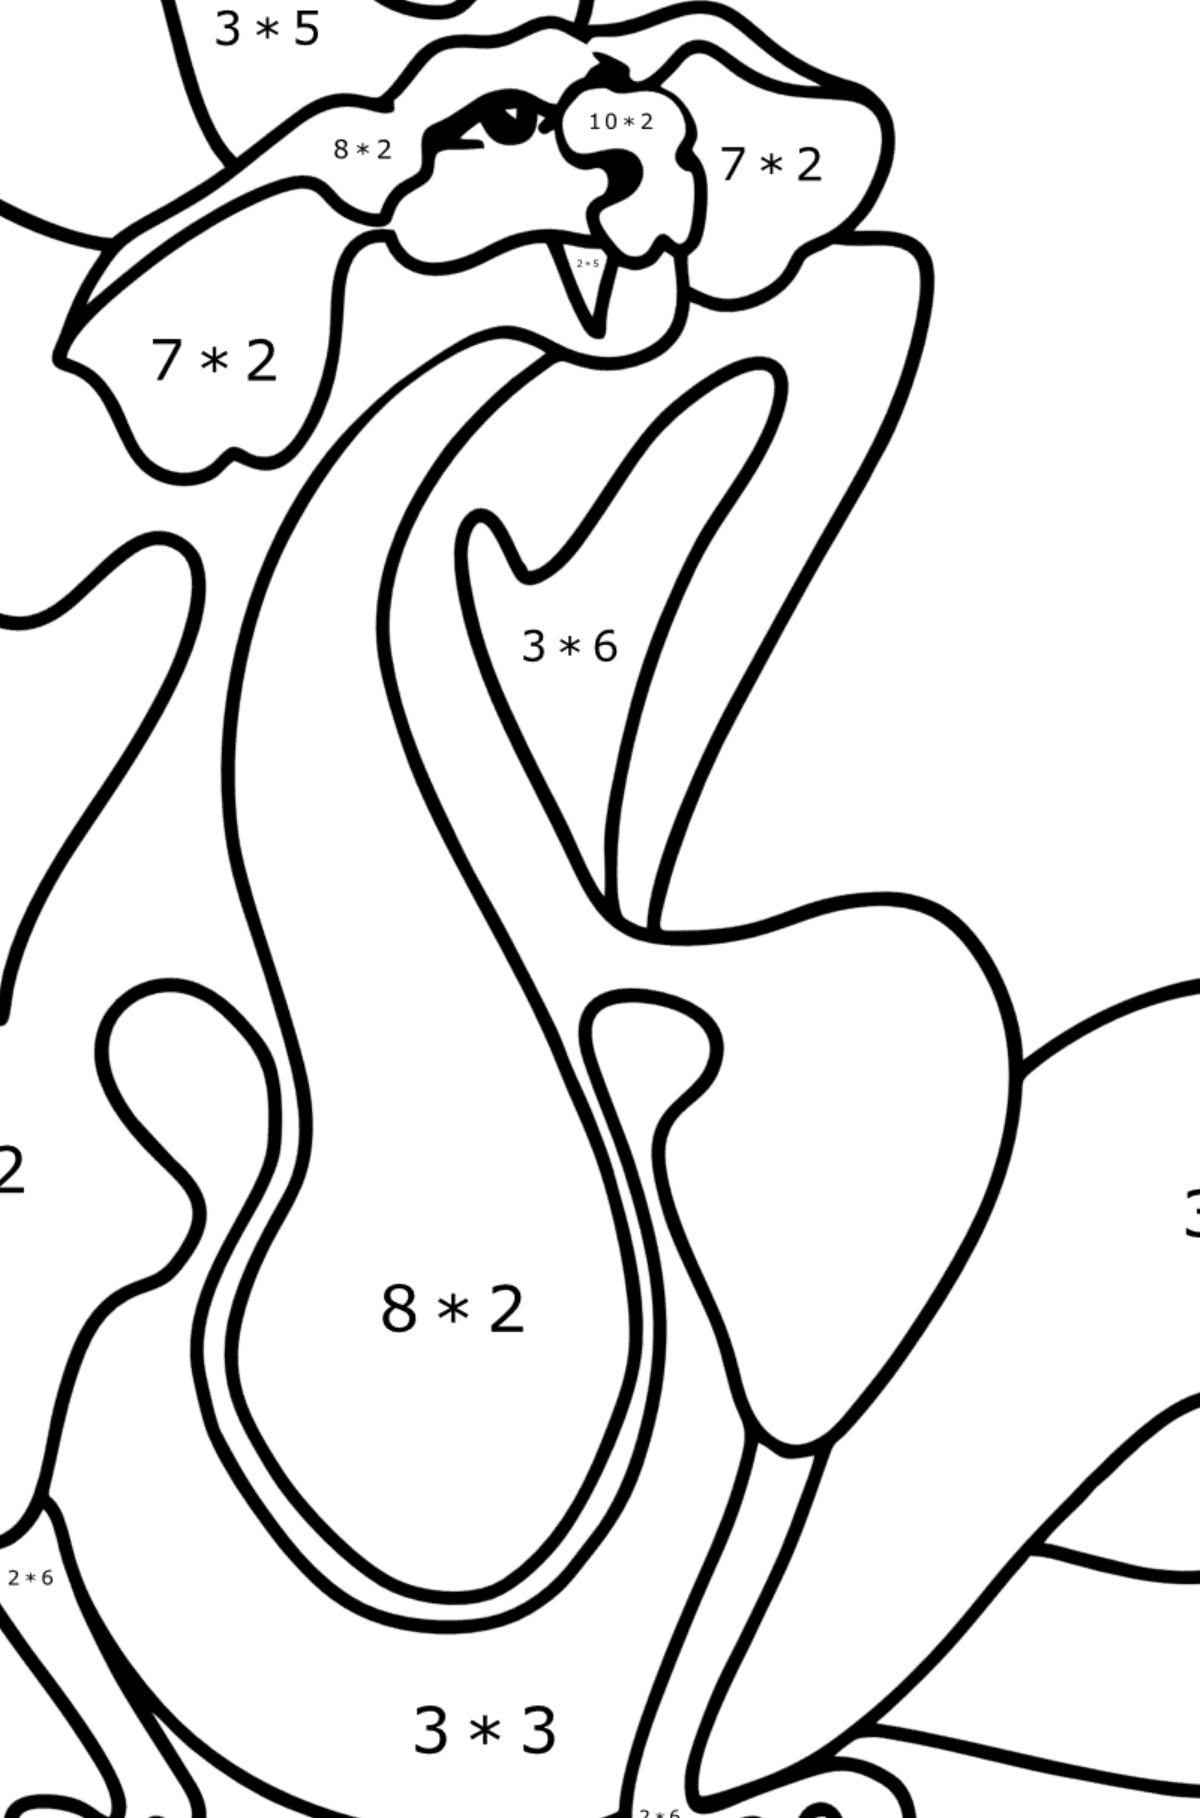 Sad Dragon coloring page - Math Coloring - Multiplication for Kids